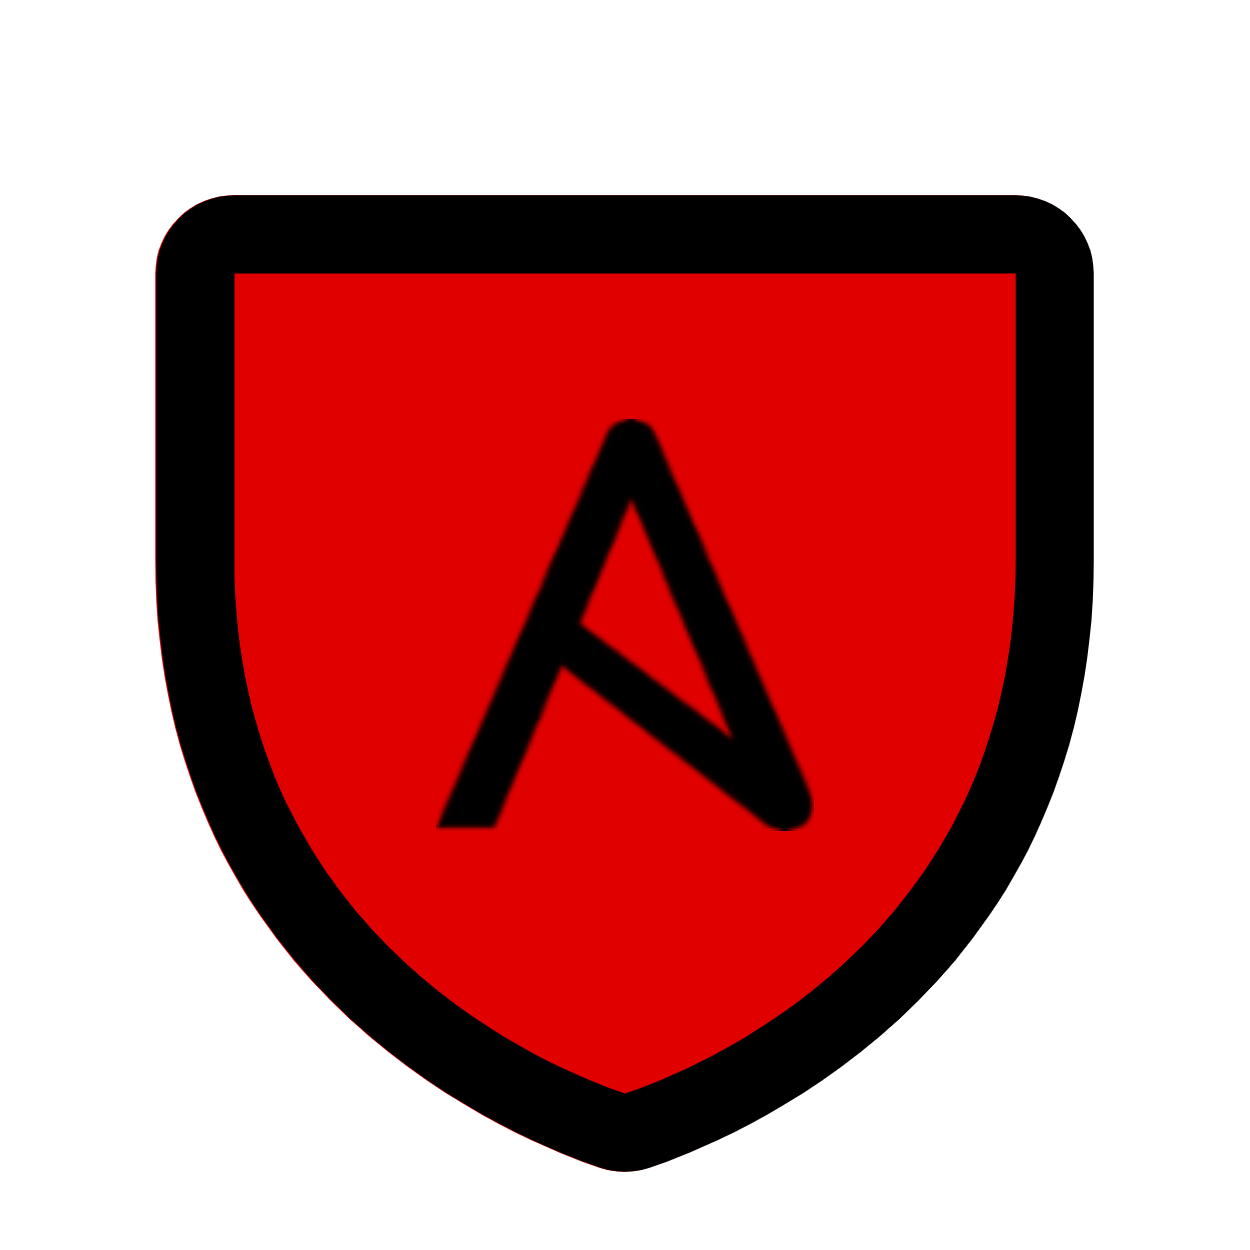 Ansible Vault standalone